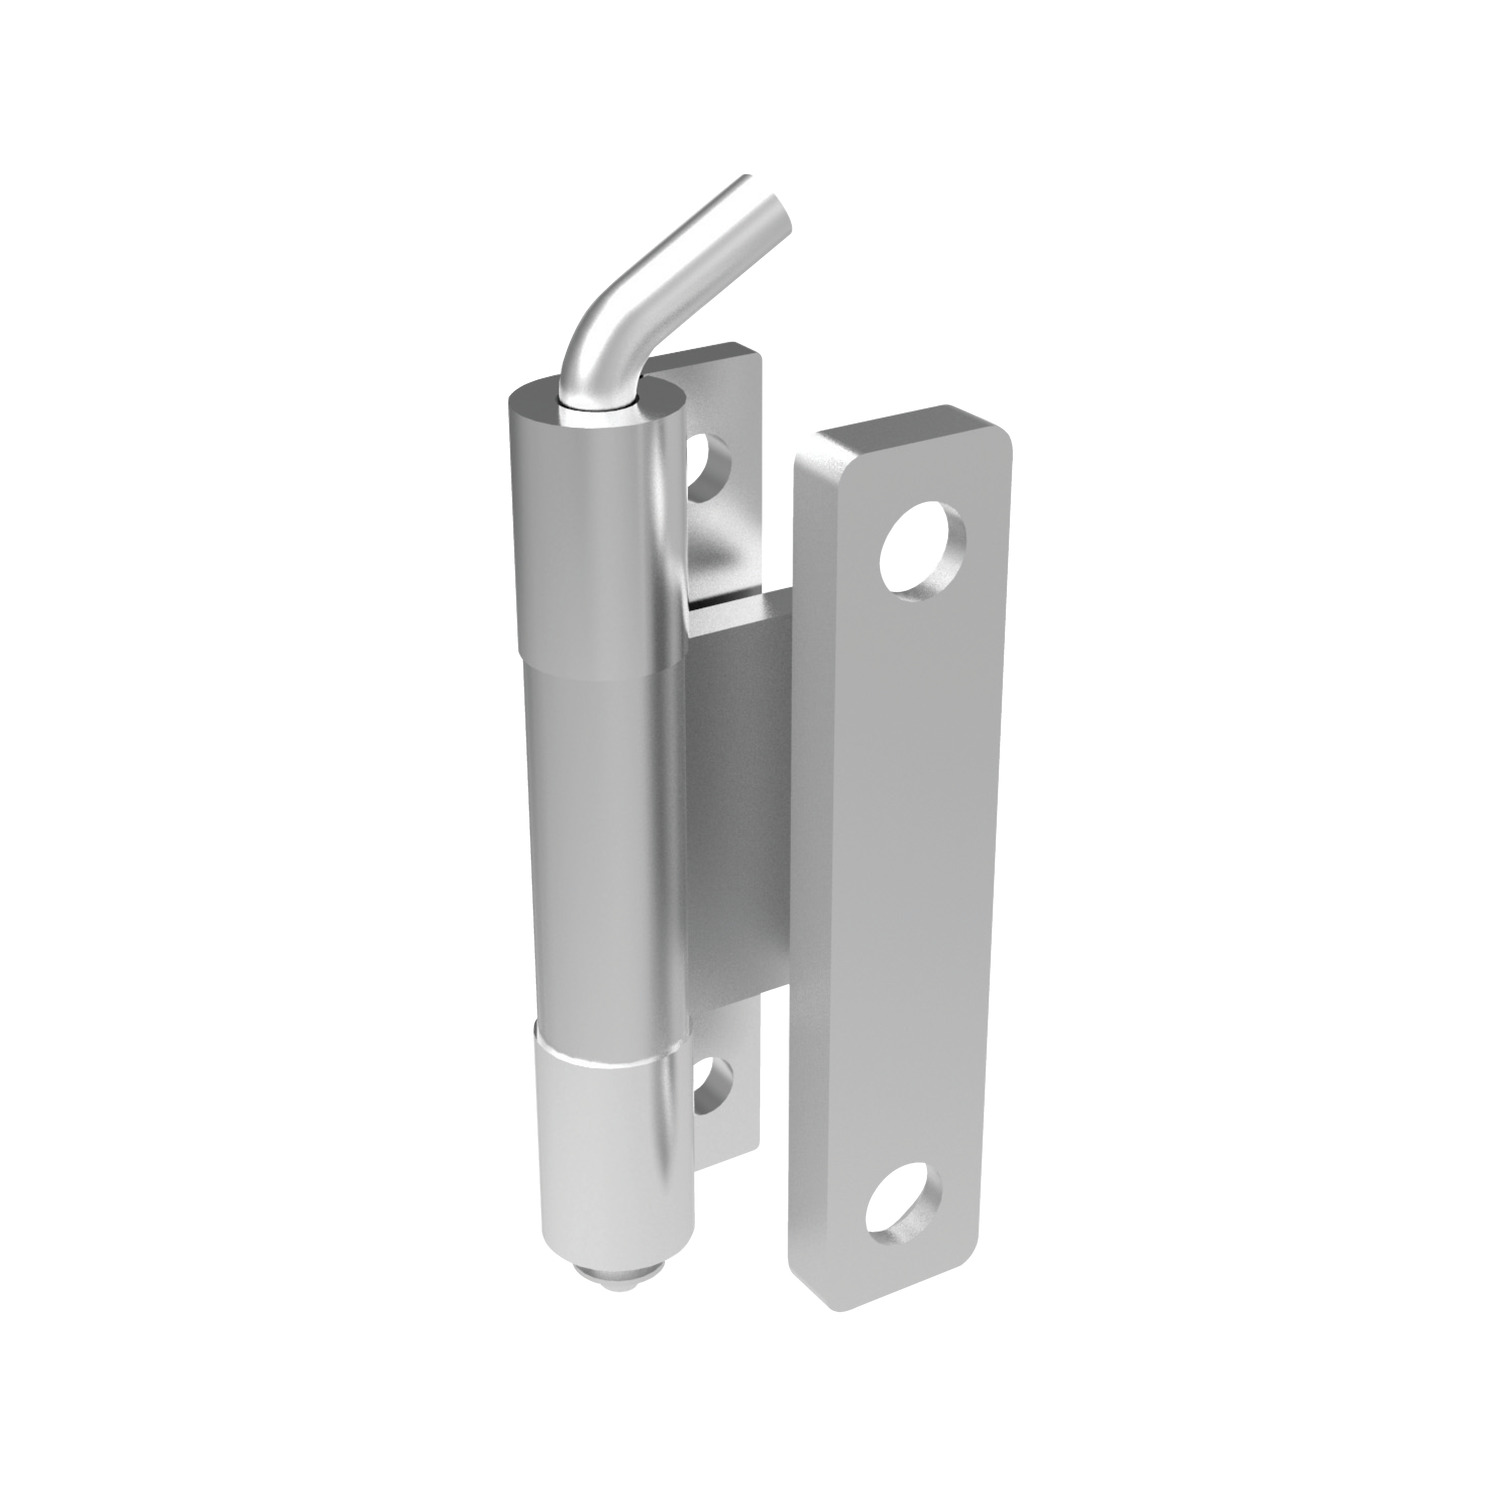 S2115 - Concealed Pivot Hinges - Lift Off